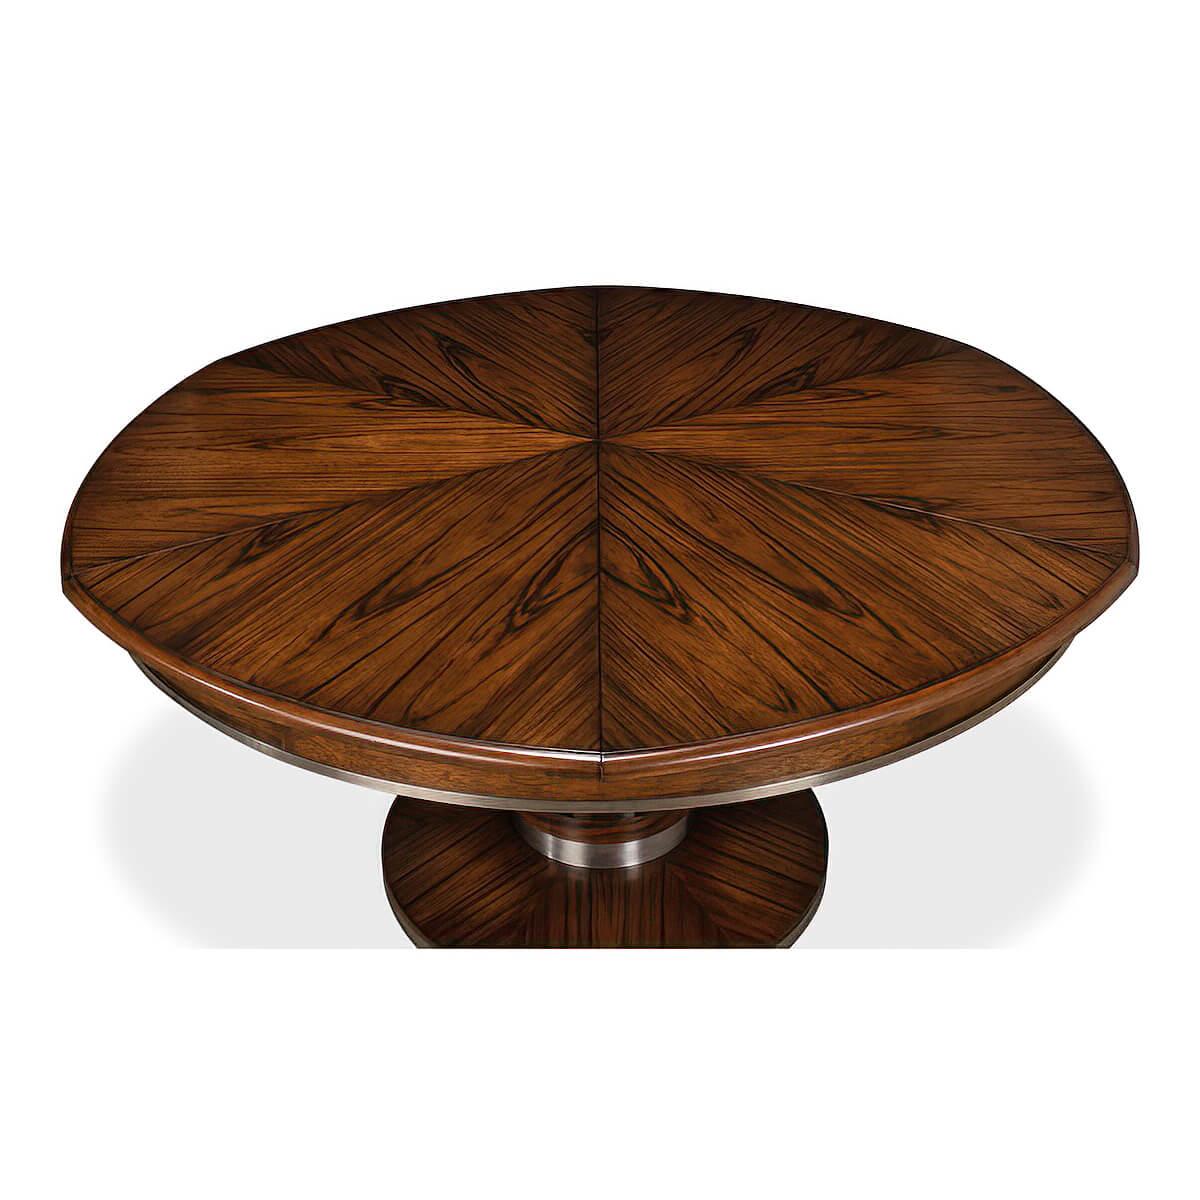 Contemporary Art Deco Style Round Extending Dining Table, 84 For Sale